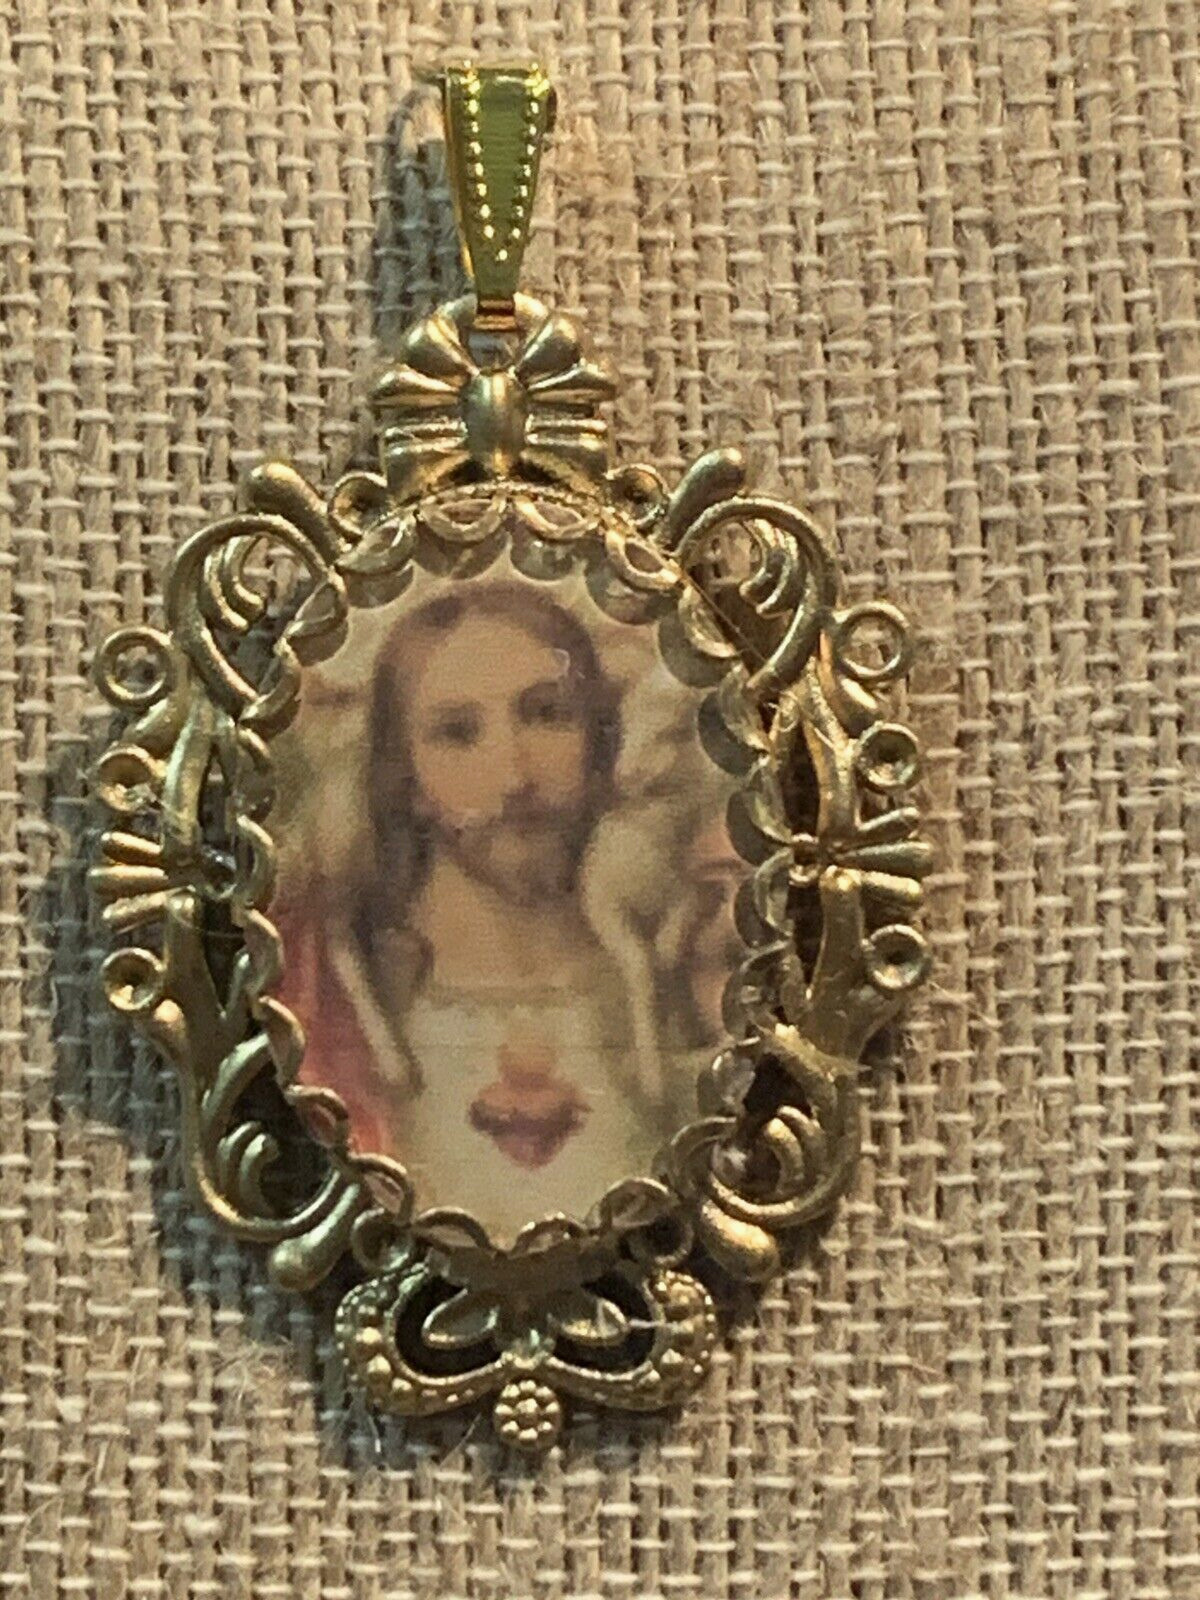 LG. FRENCH REPRODUCTION SACRED HEART JESUS W/LAMB CAMEO PENDANT.G crown bezel